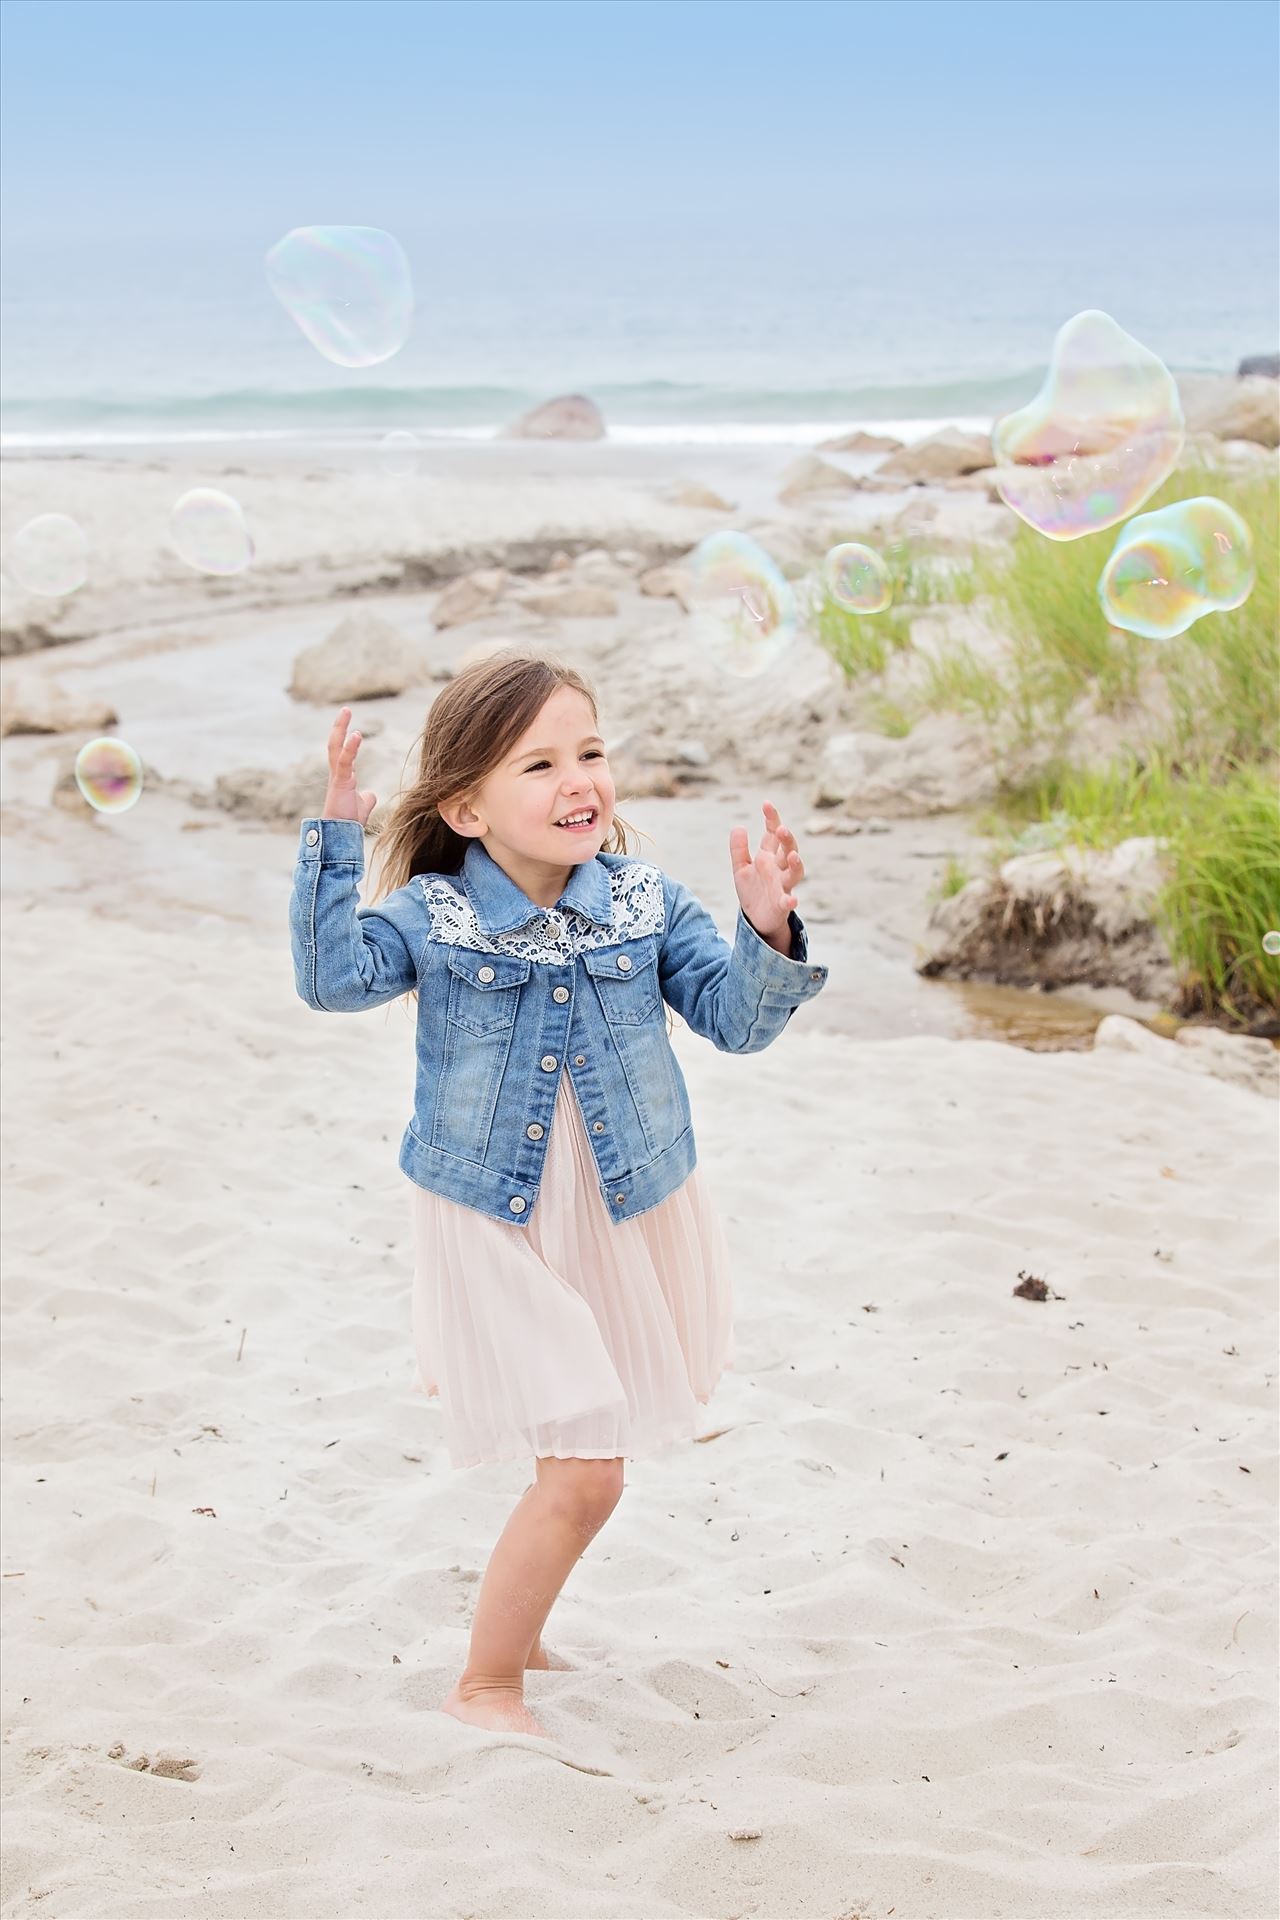 HalfyardFamily 23 - Halfyard Family. Family photography beach session. by Maria Angelopoulos Photogrpahy